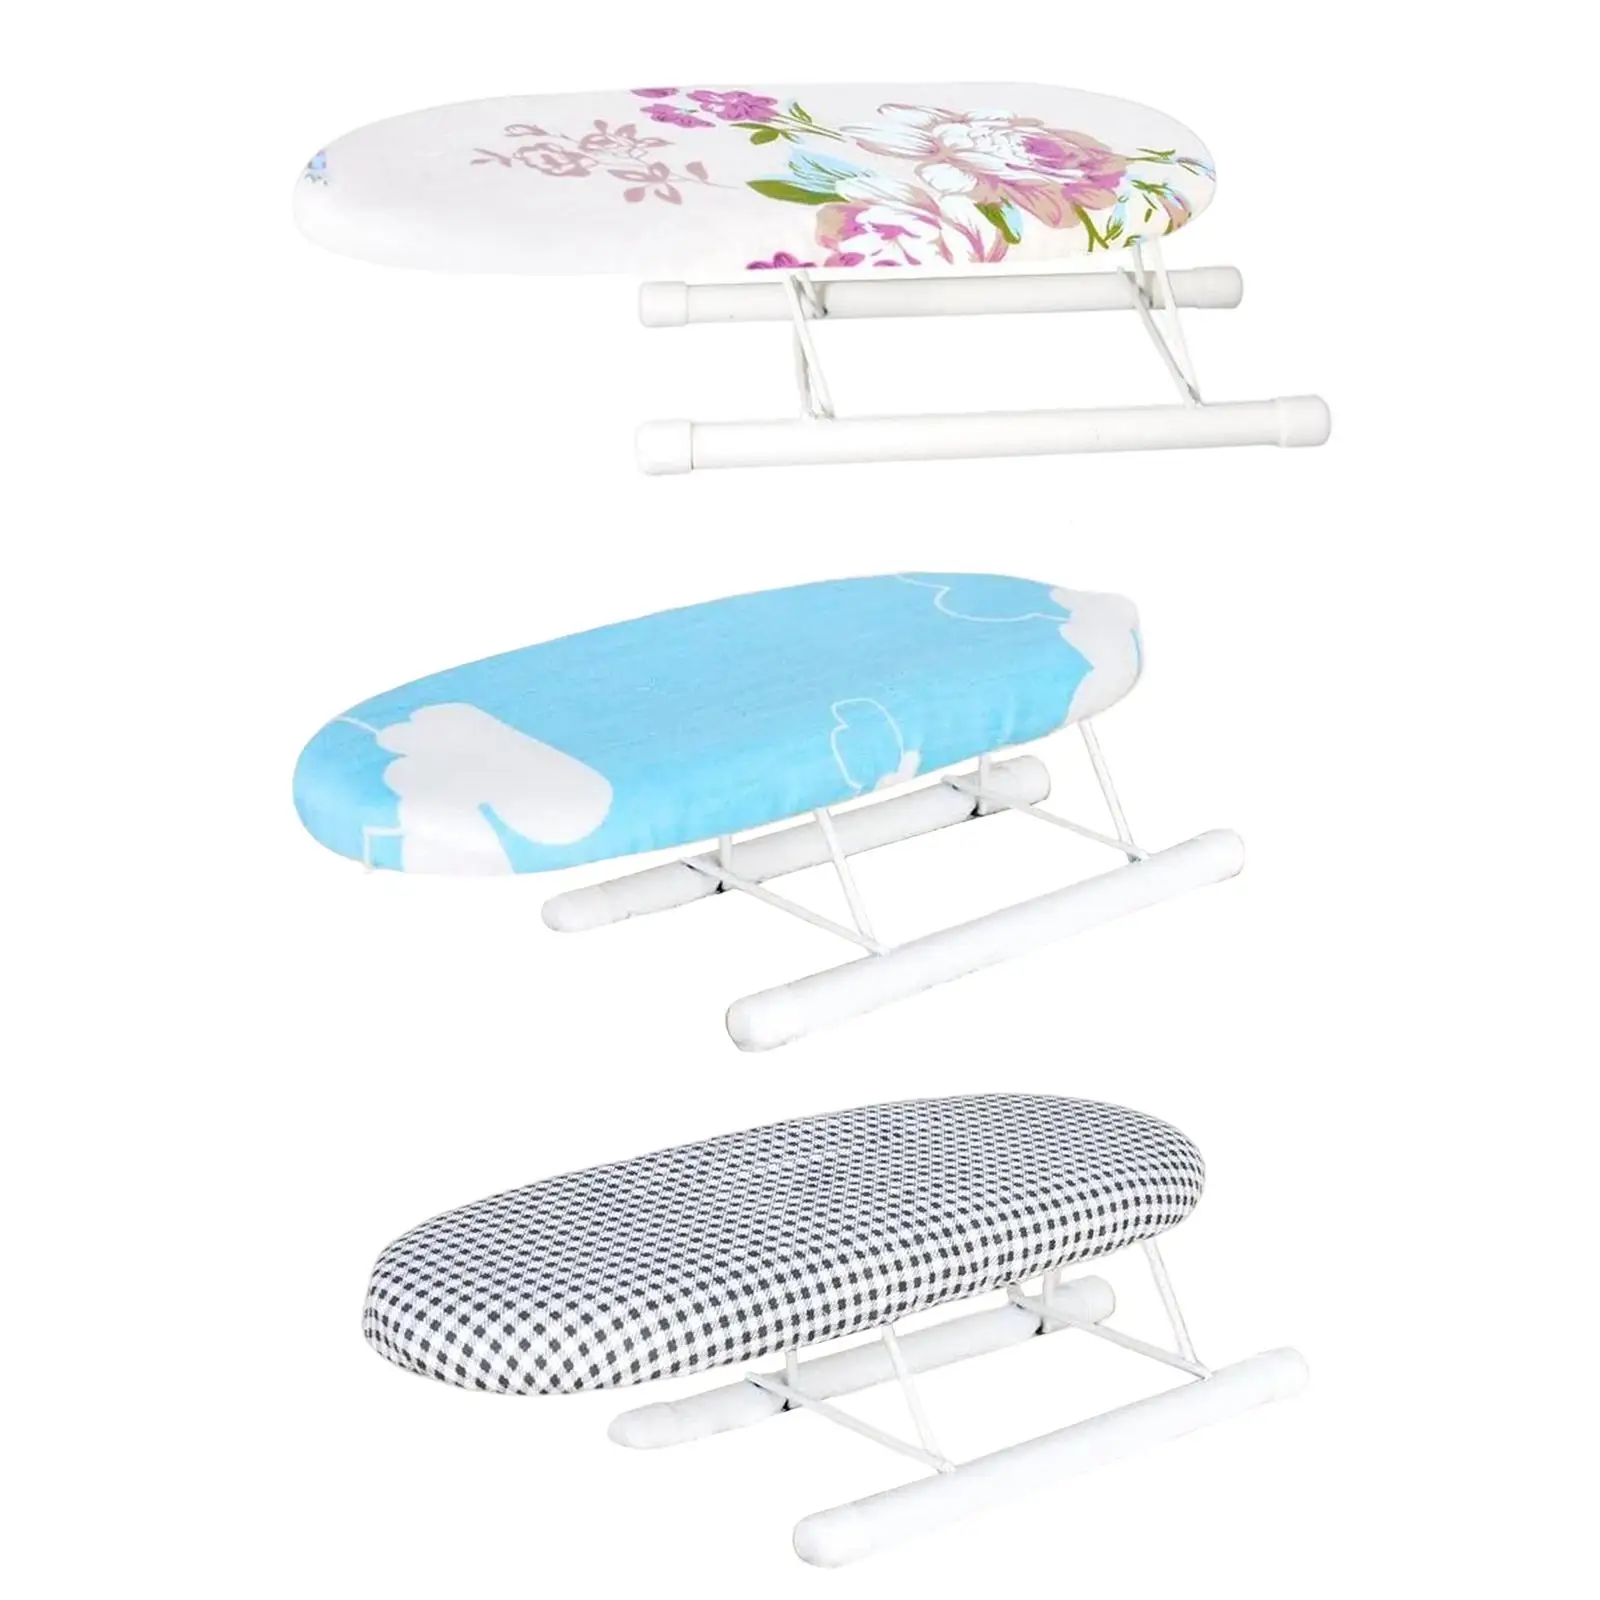 Portable Table Top Ironing Board Washable Removable for Small Spaces Travel Laundry